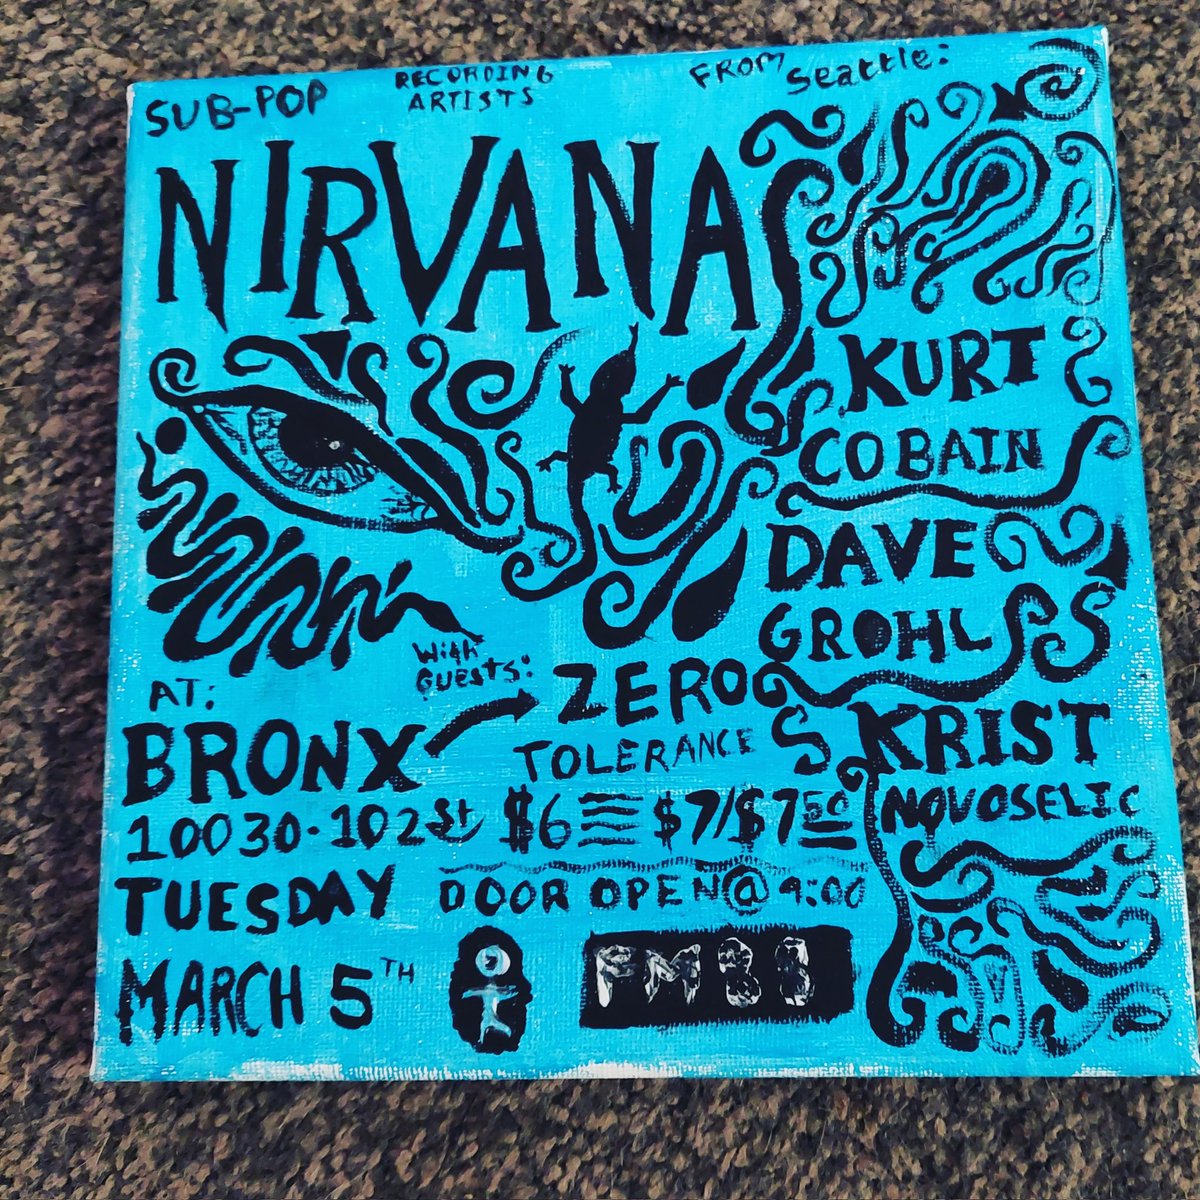 My daughter made this for my birthday .. love it! 
#Nirvana #nirvanafans #artwork 
#musicart #canvasart